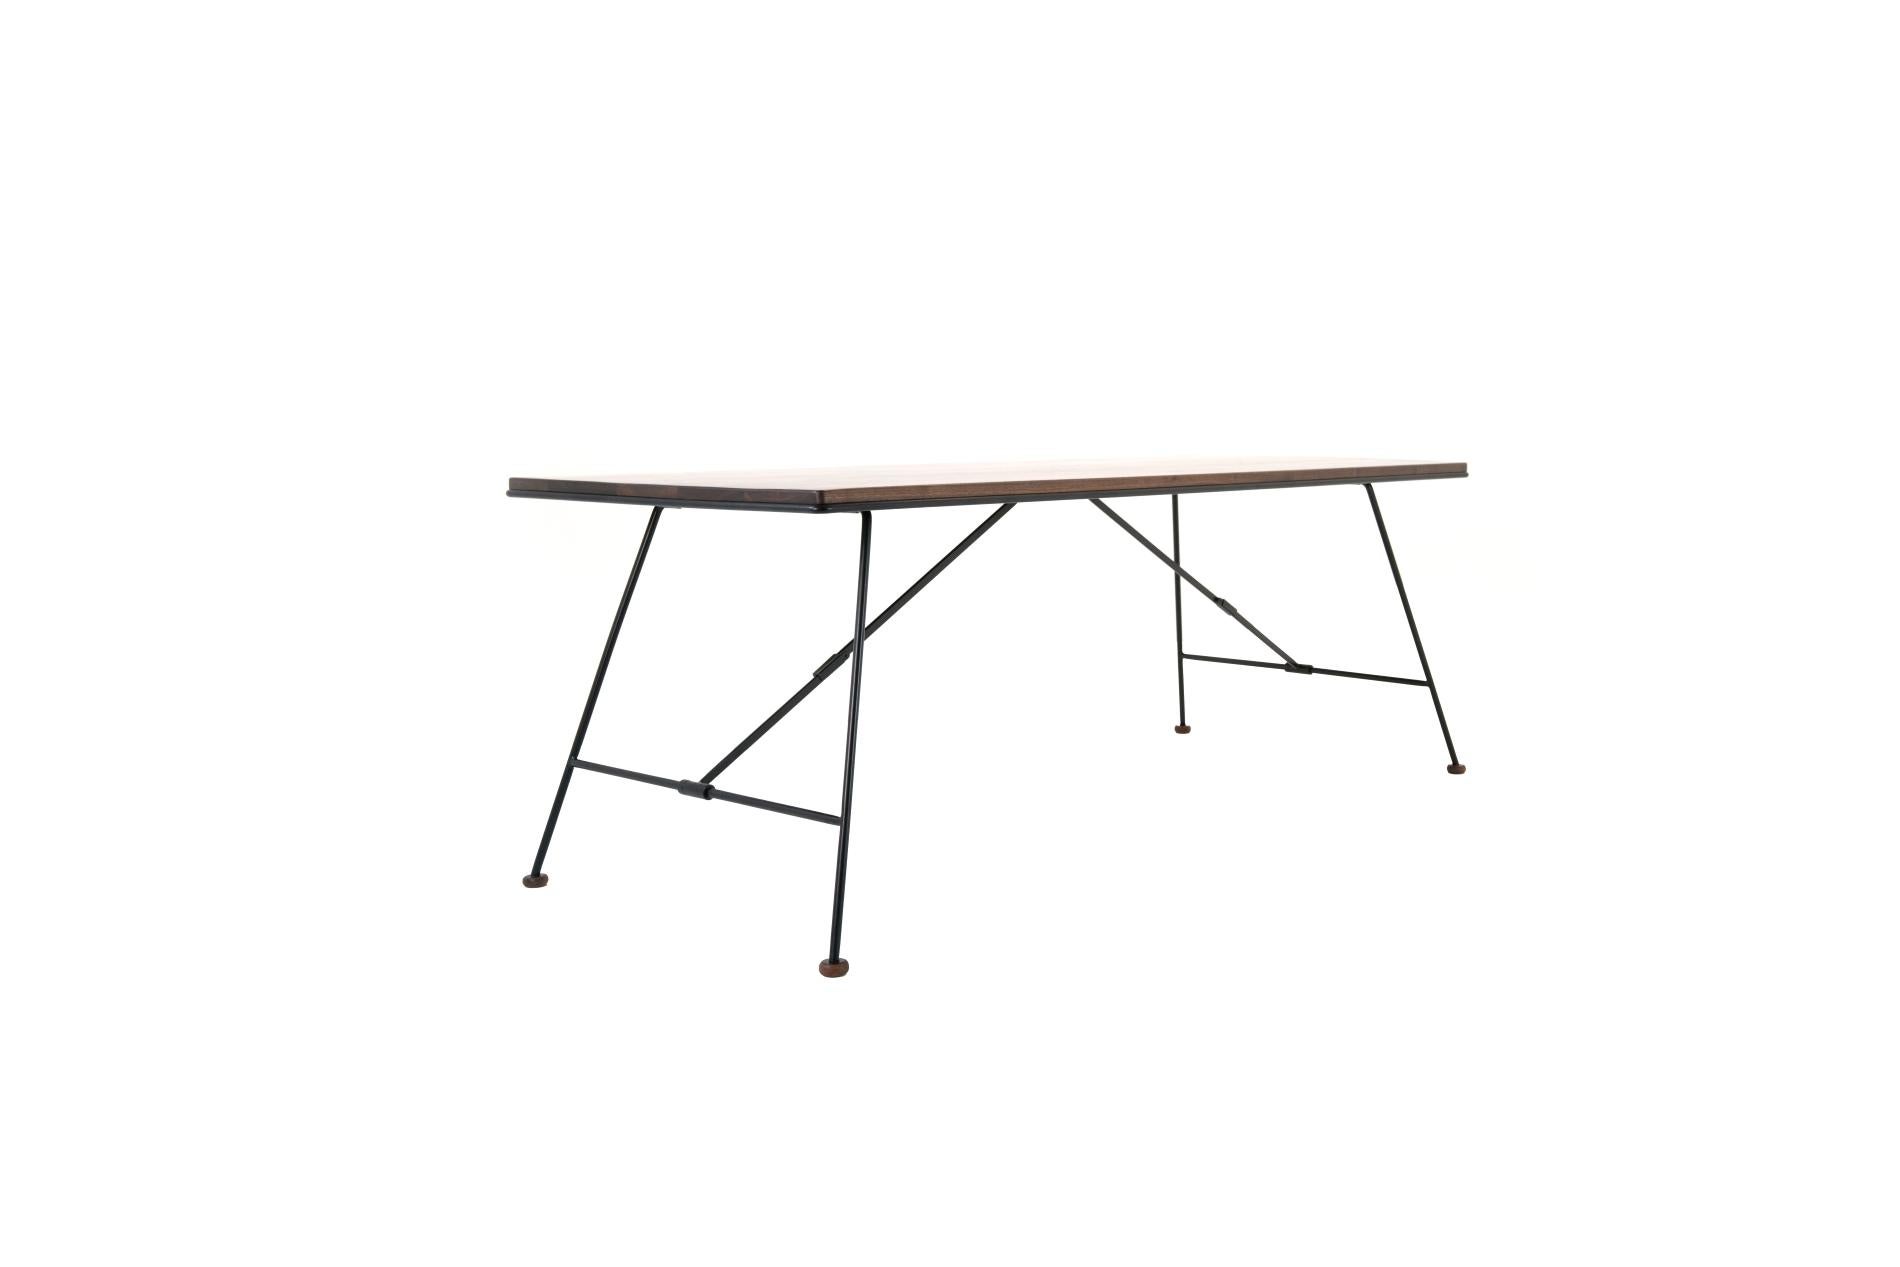 Inspired by old-school field operating tables, the Mikado folding table features a solid wood top and solid steel legs. In-cased with a signature steel edge to protect the wood when folded flat. The mikado table comes in four sizes and is suitable